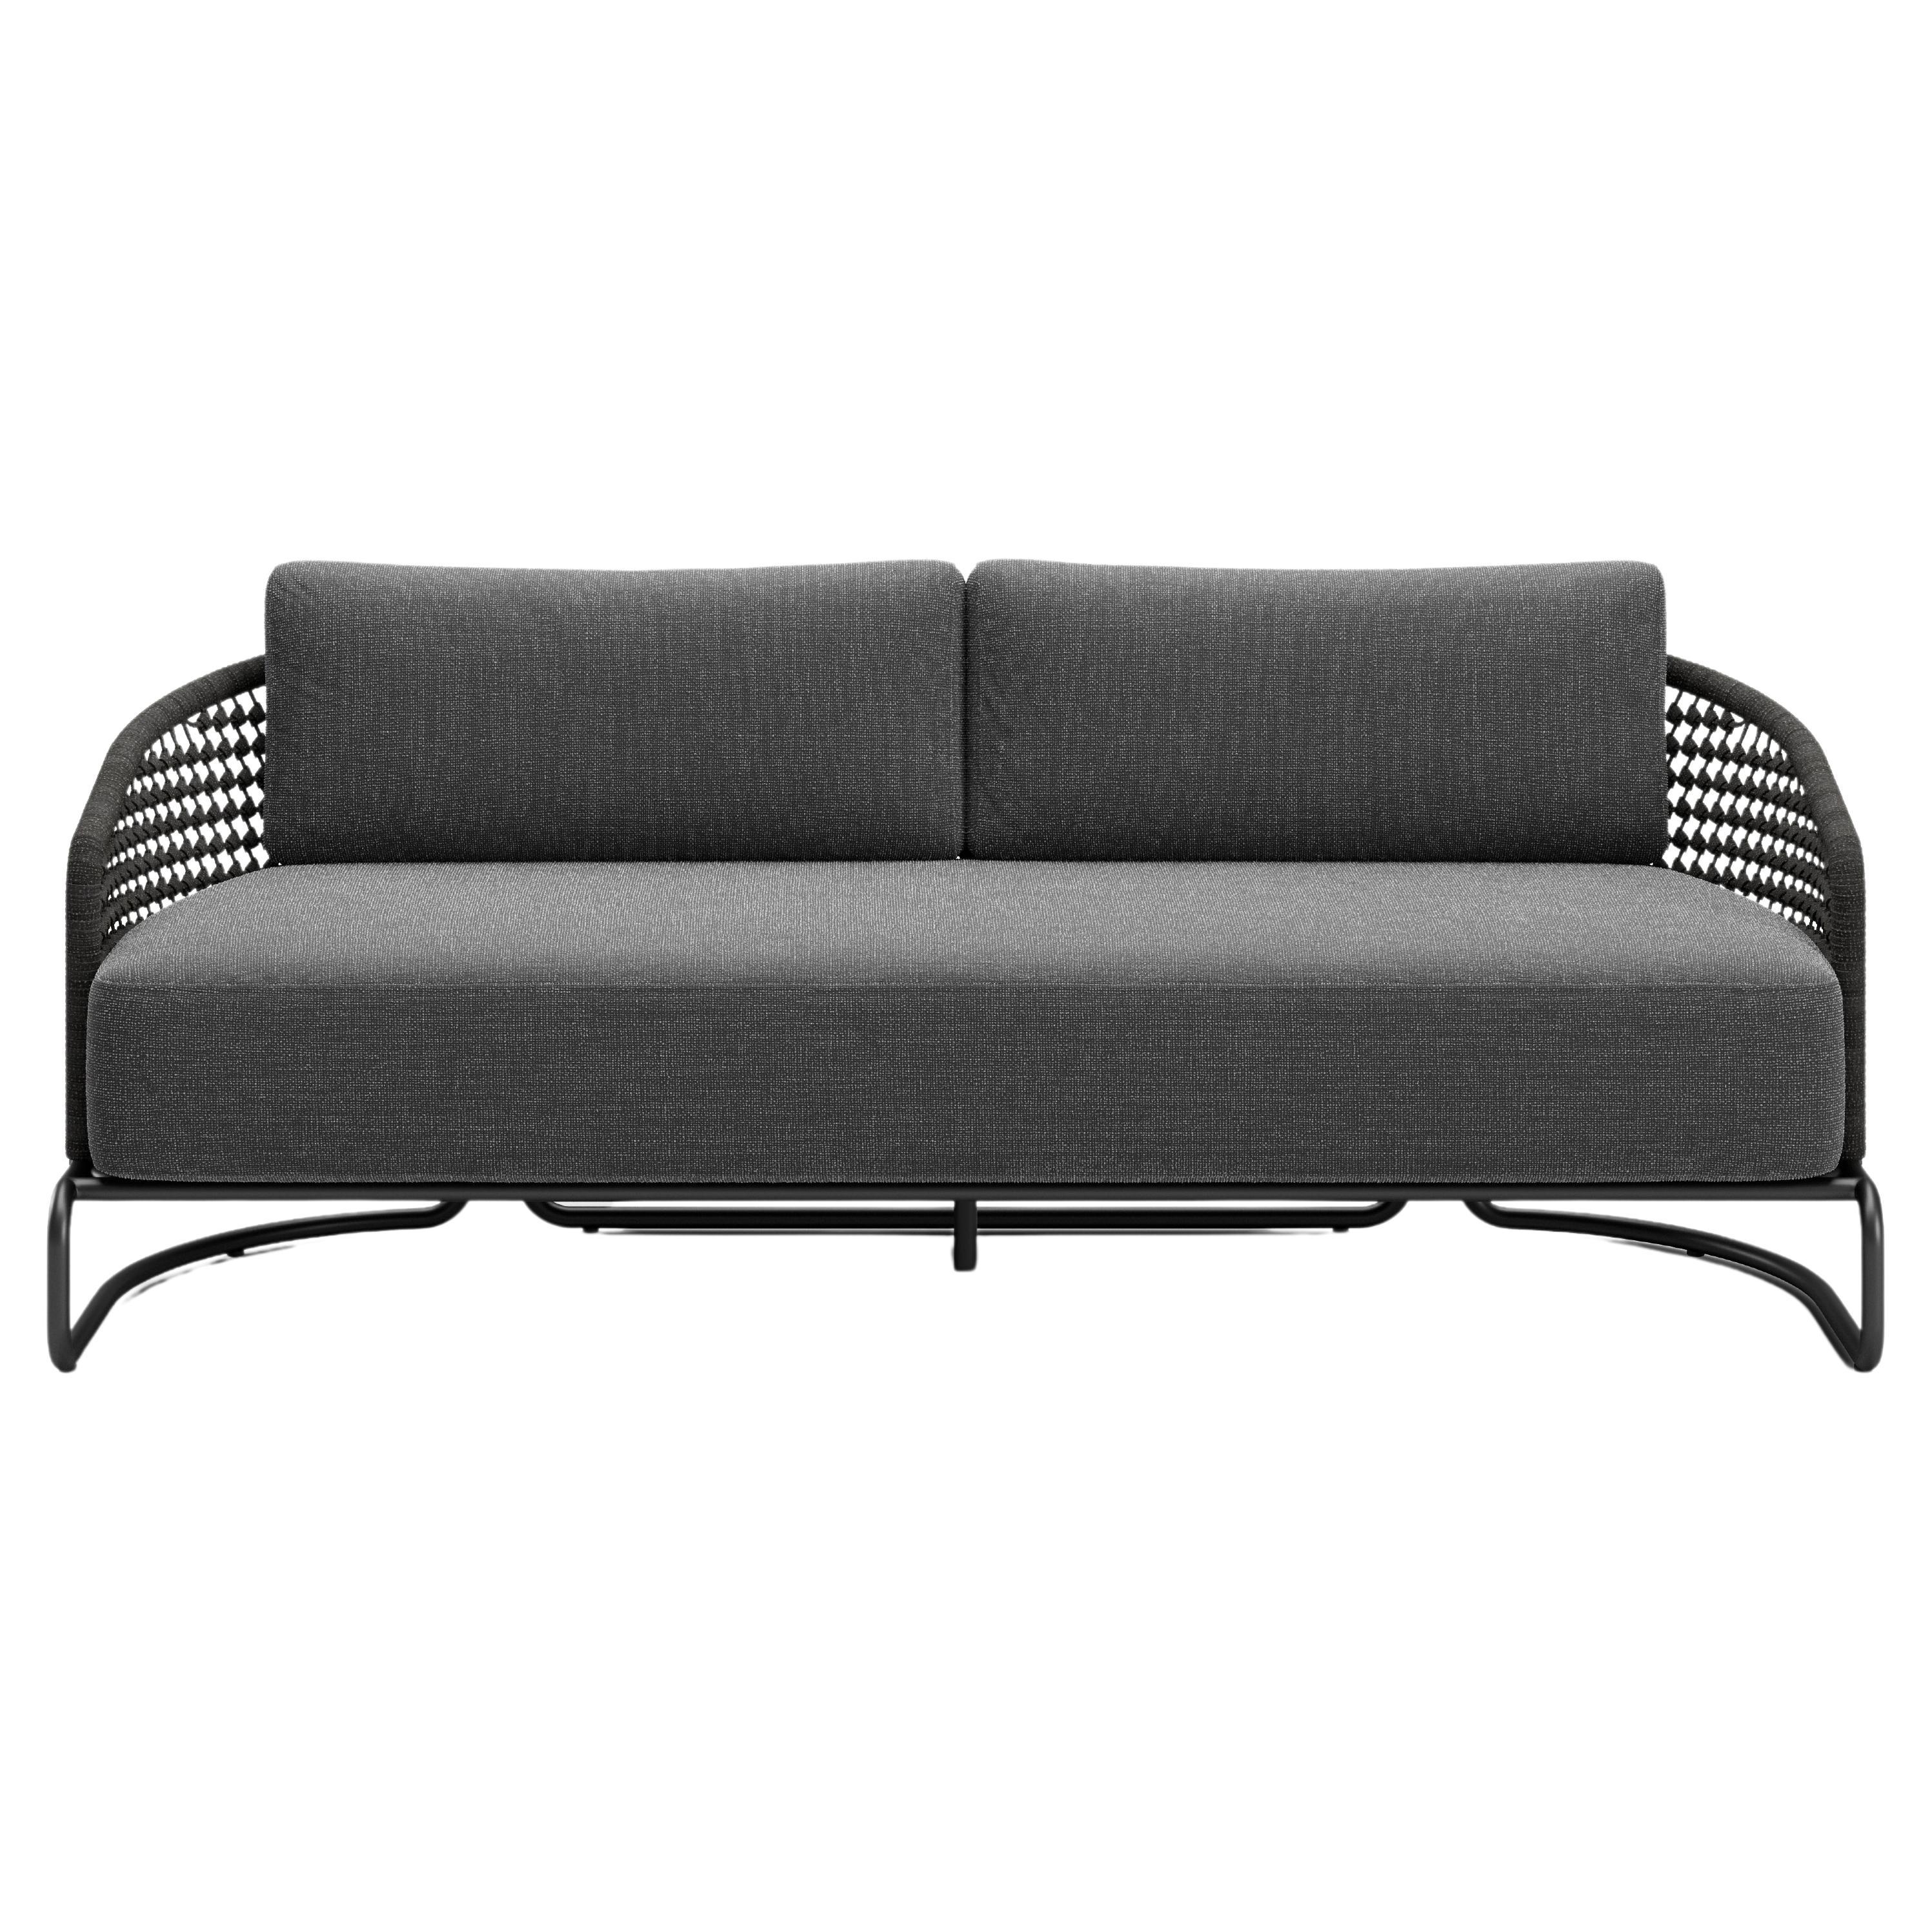 Pigalle Outdoor 2 Seater Sofa by Snoc For Sale